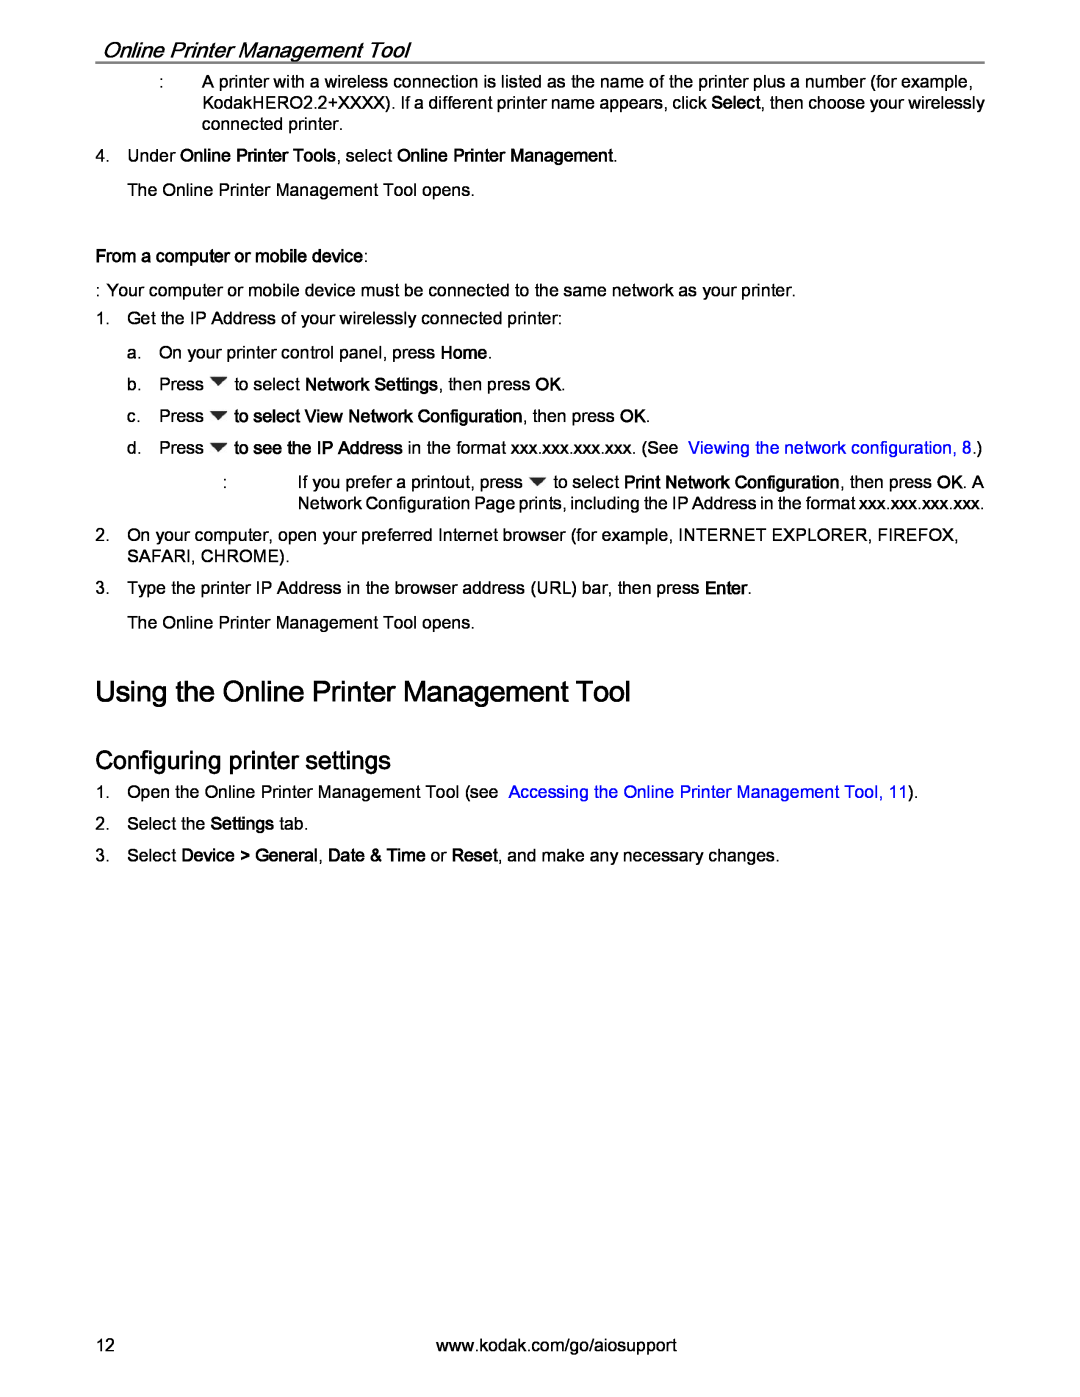 Kodak 2.2 manual Using the Online Printer Management Tool, Configuring printer settings, From a computer or mobile device 